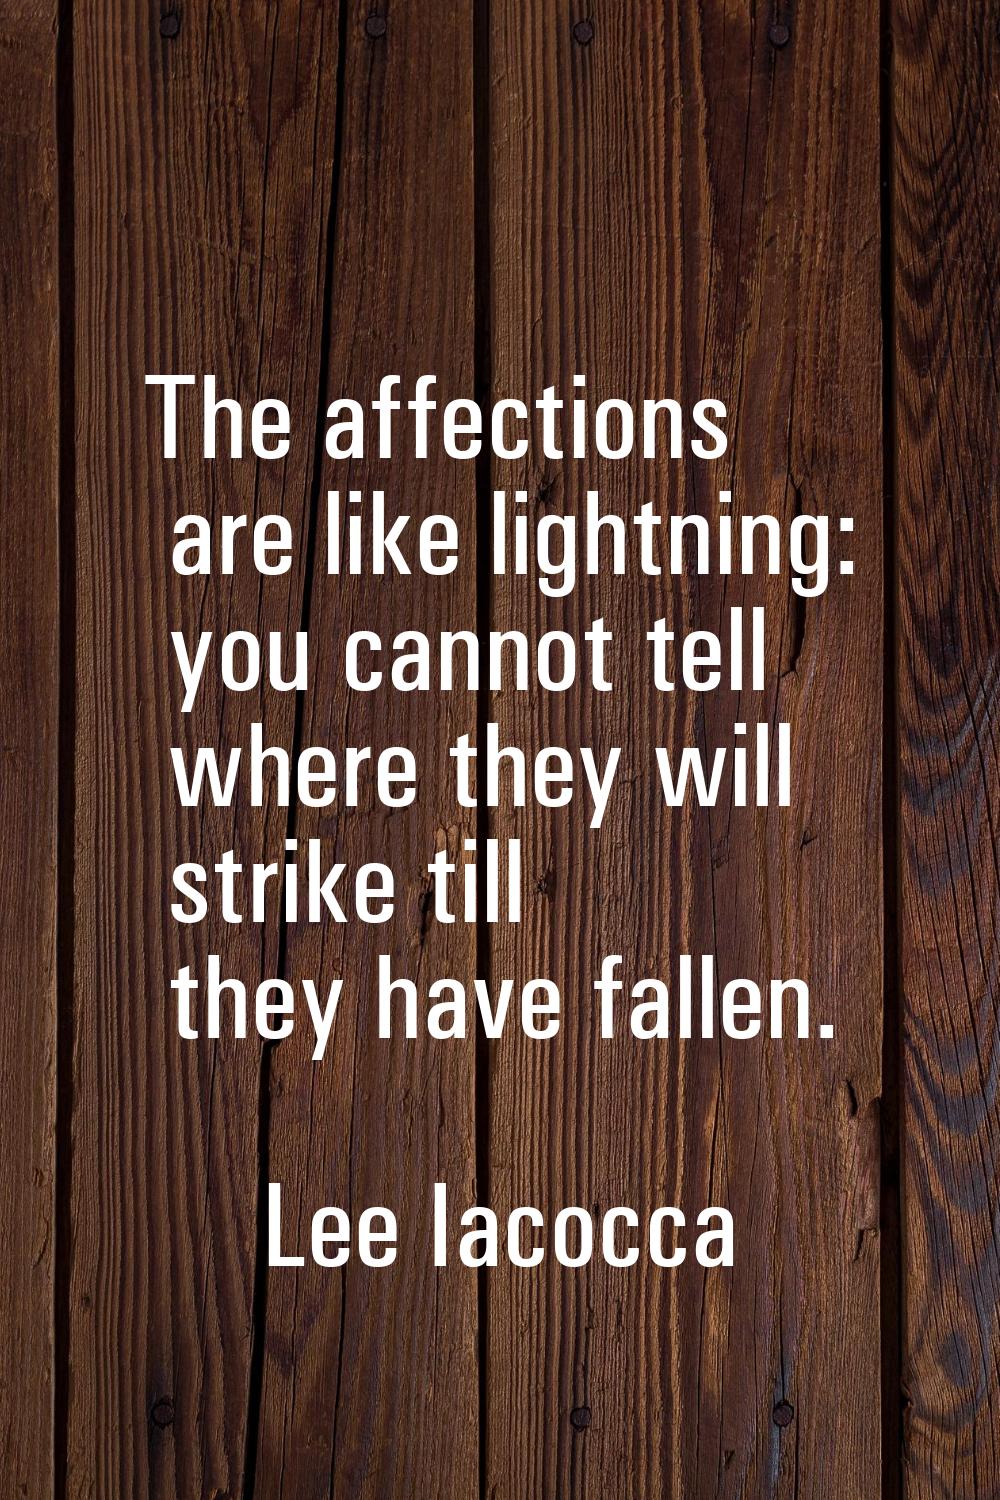 The affections are like lightning: you cannot tell where they will strike till they have fallen.